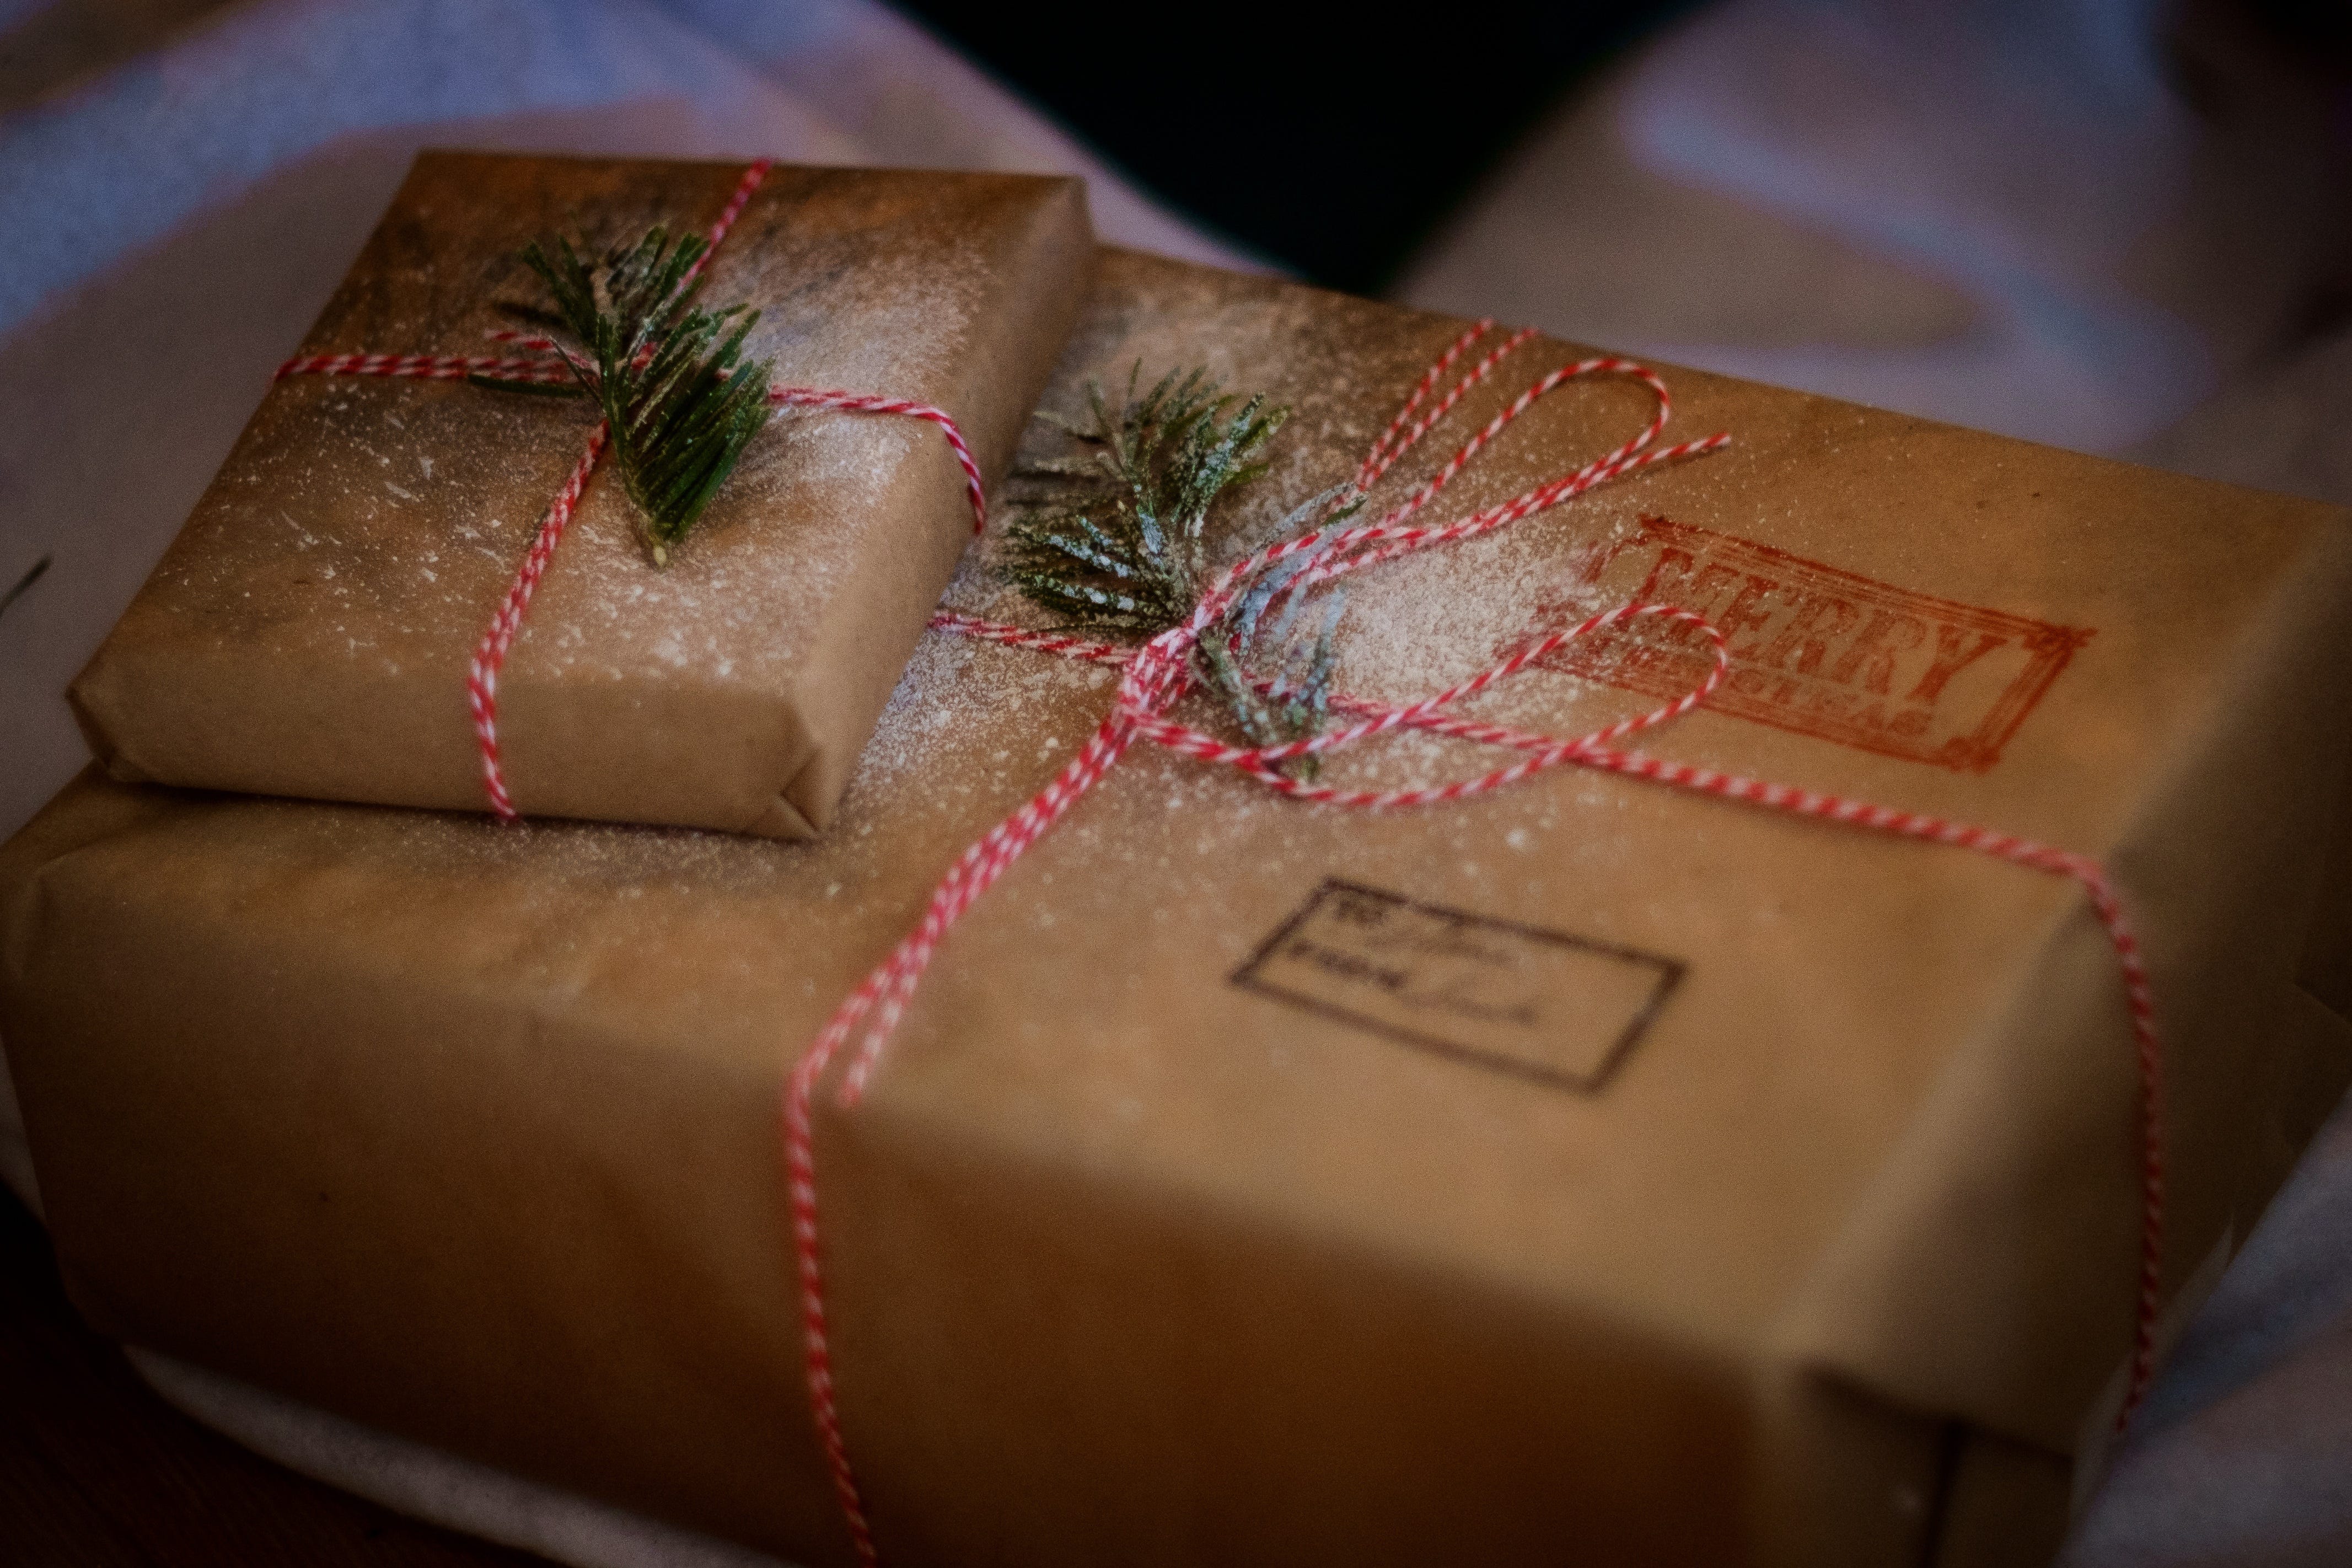 I Hate Buying Christmas Gifts for Some People | by Taylor Stockwell | Medium